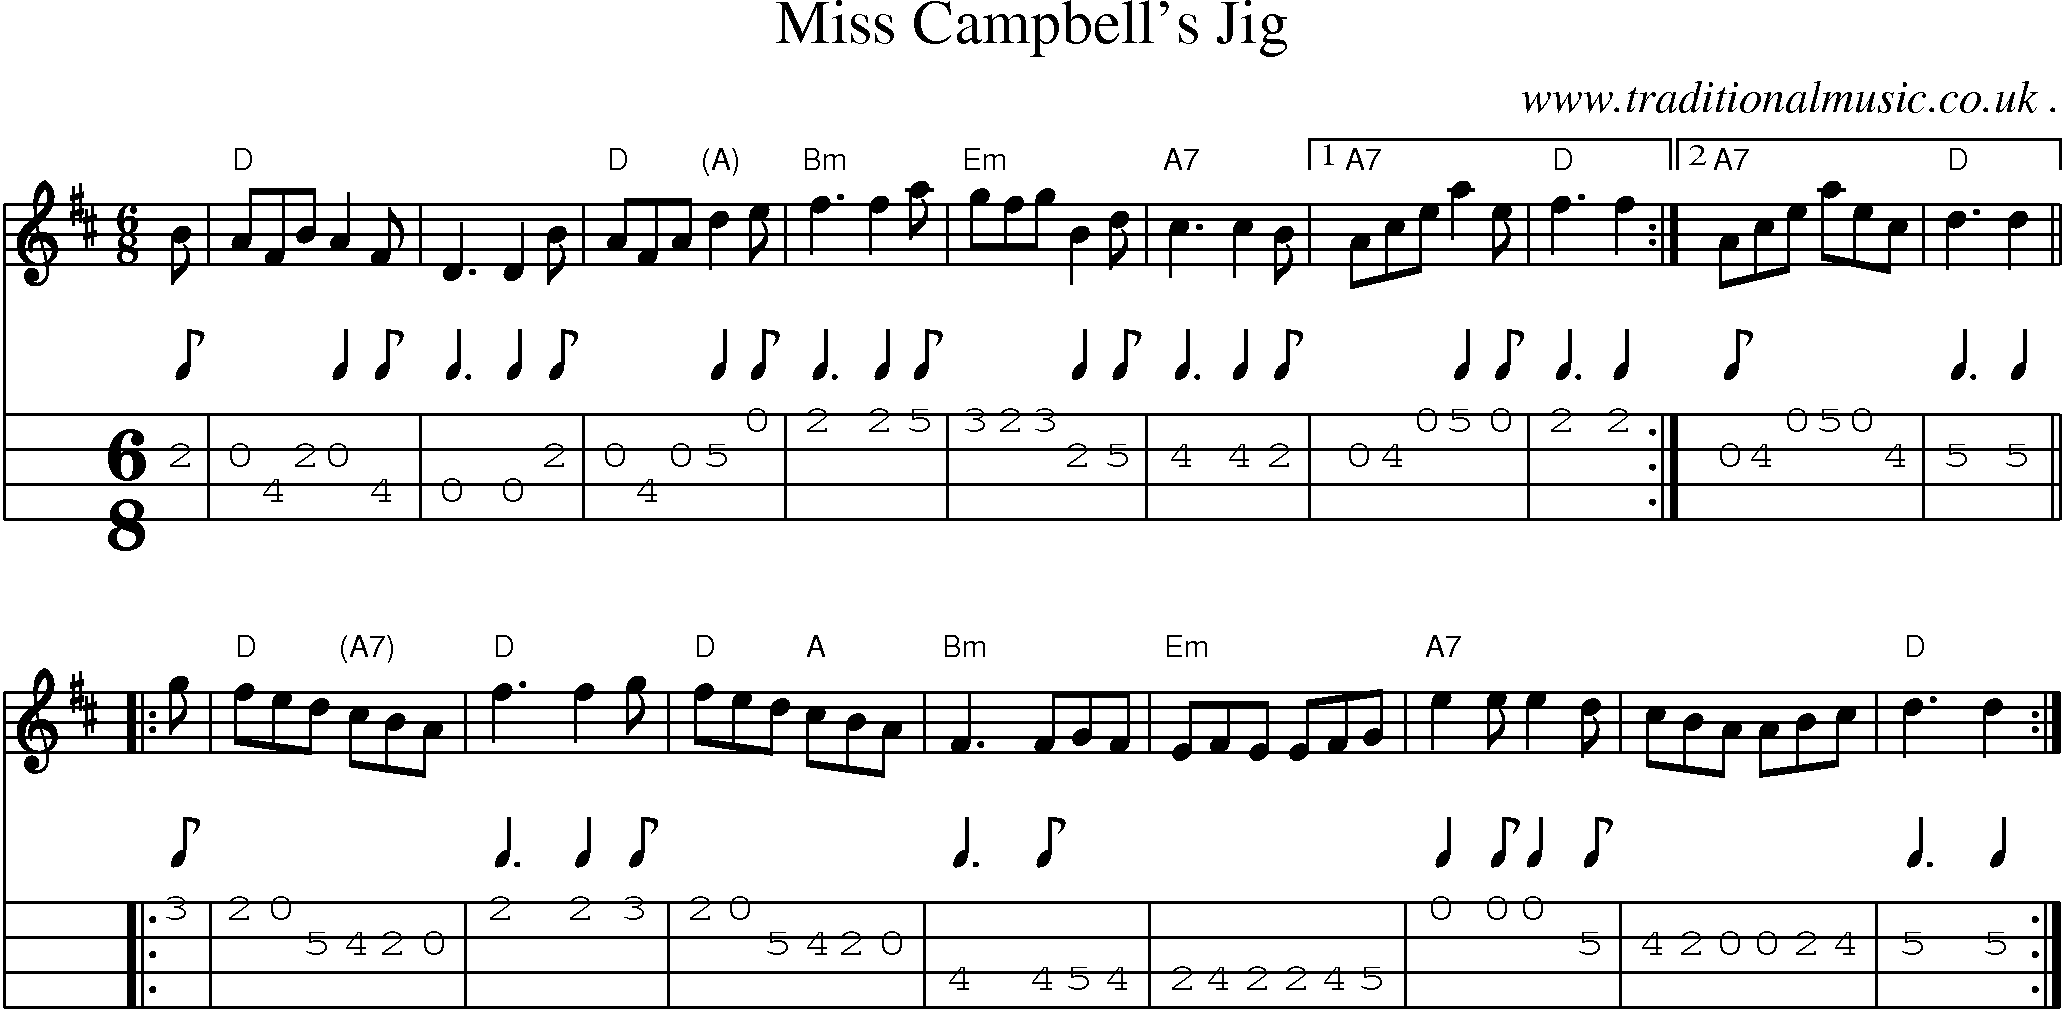 Sheet-music  score, Chords and Mandolin Tabs for Miss Campbells Jig